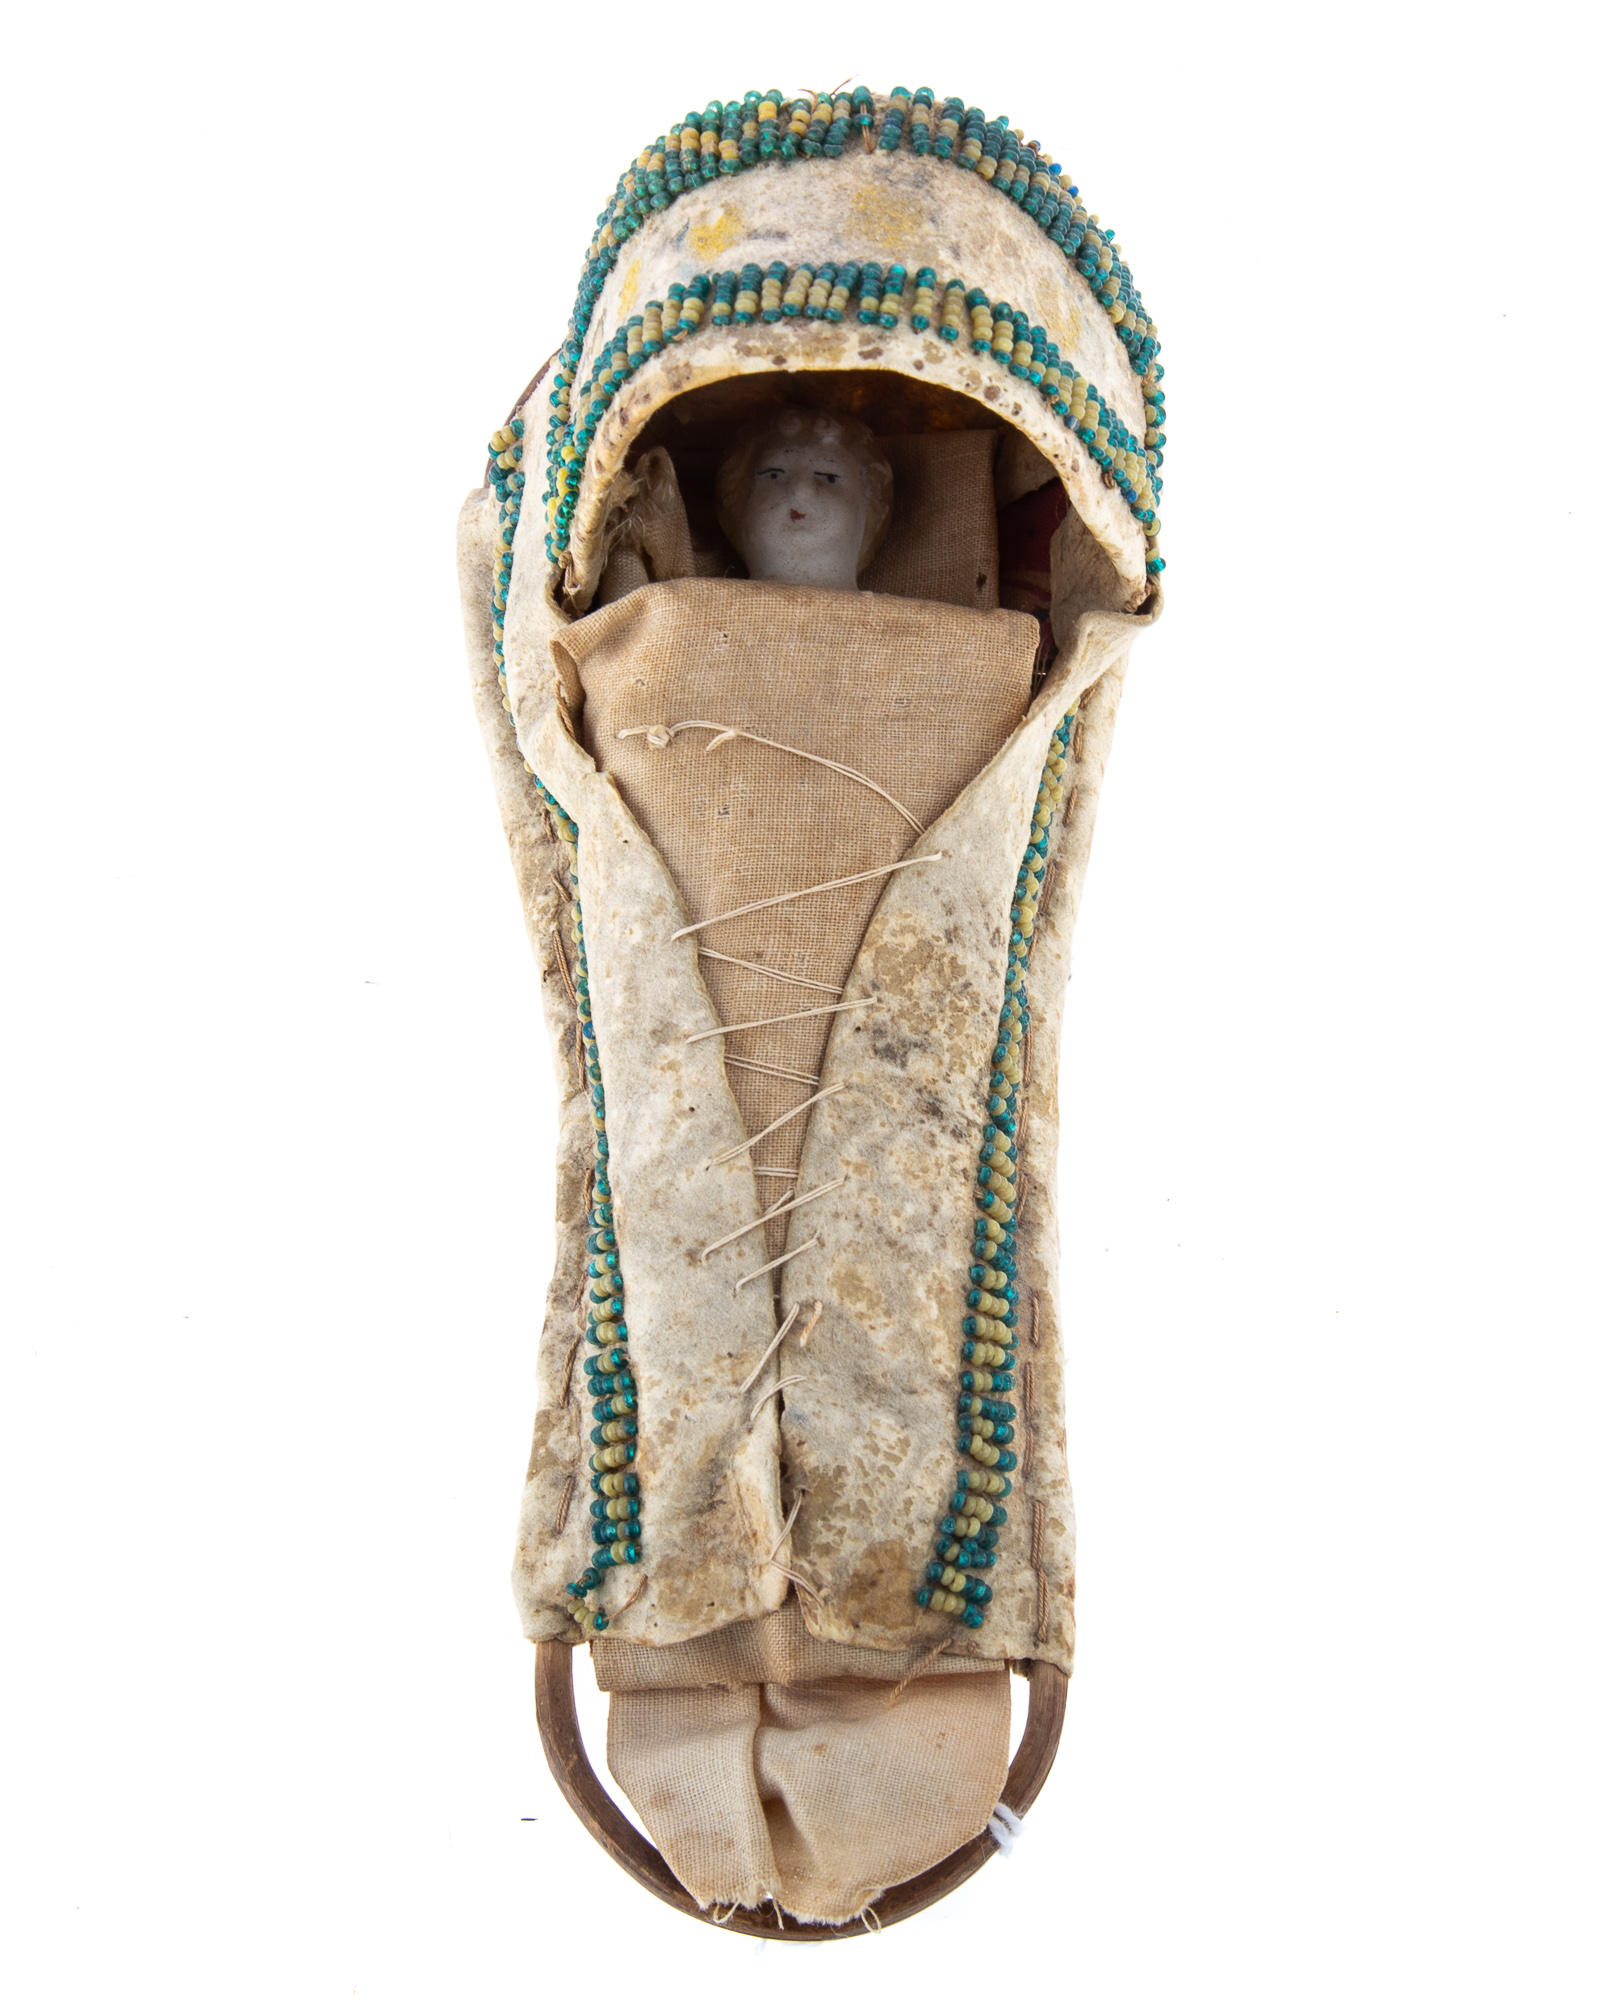 NATIVE AMERICAN MODEL OF A PAPOOSE CRADLE